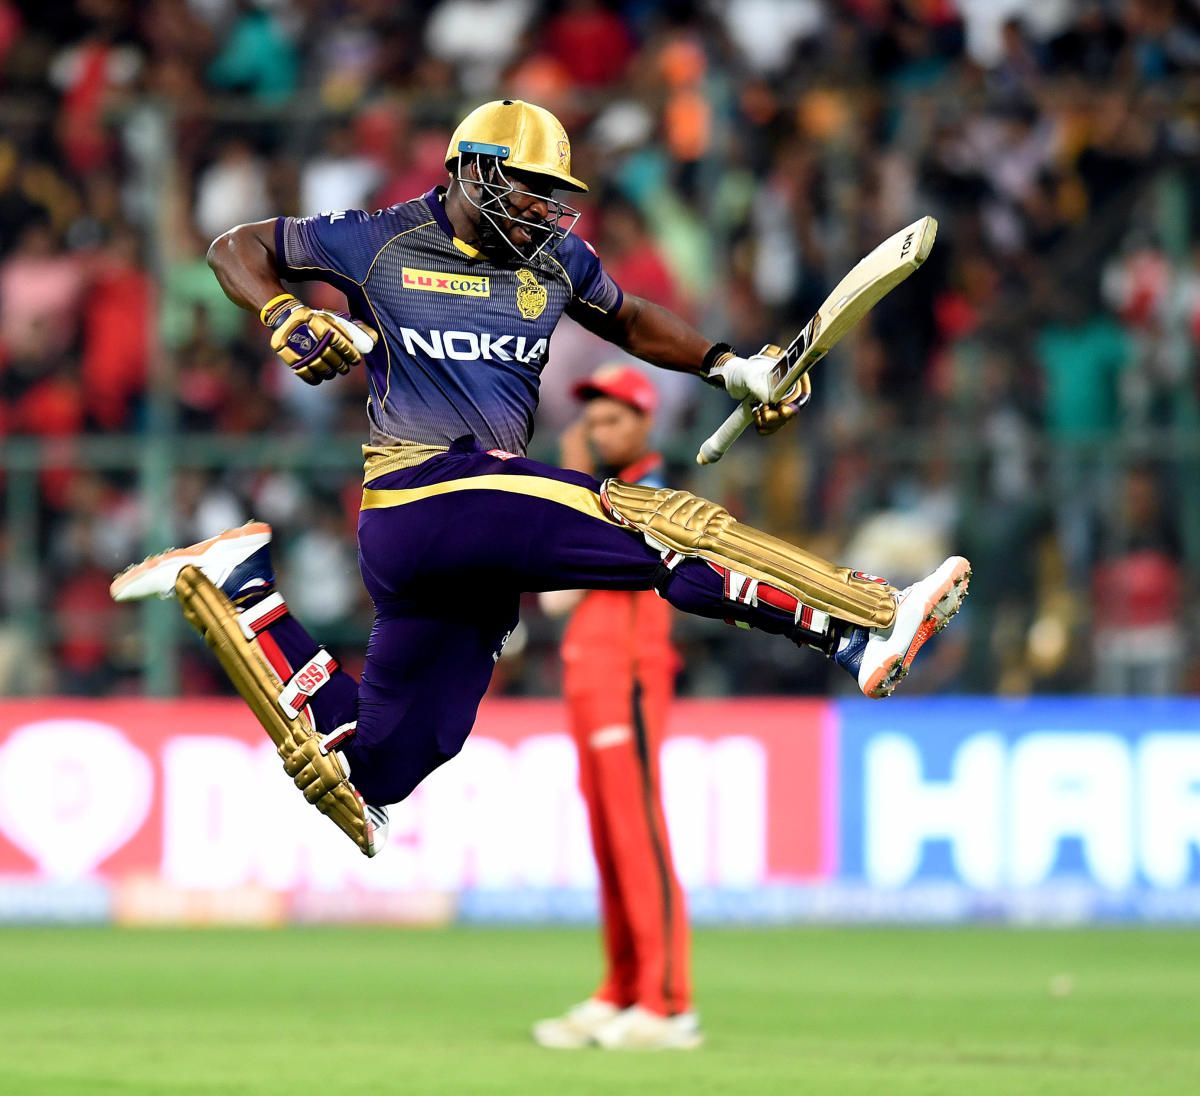 Ruthless Russell decimates RCB